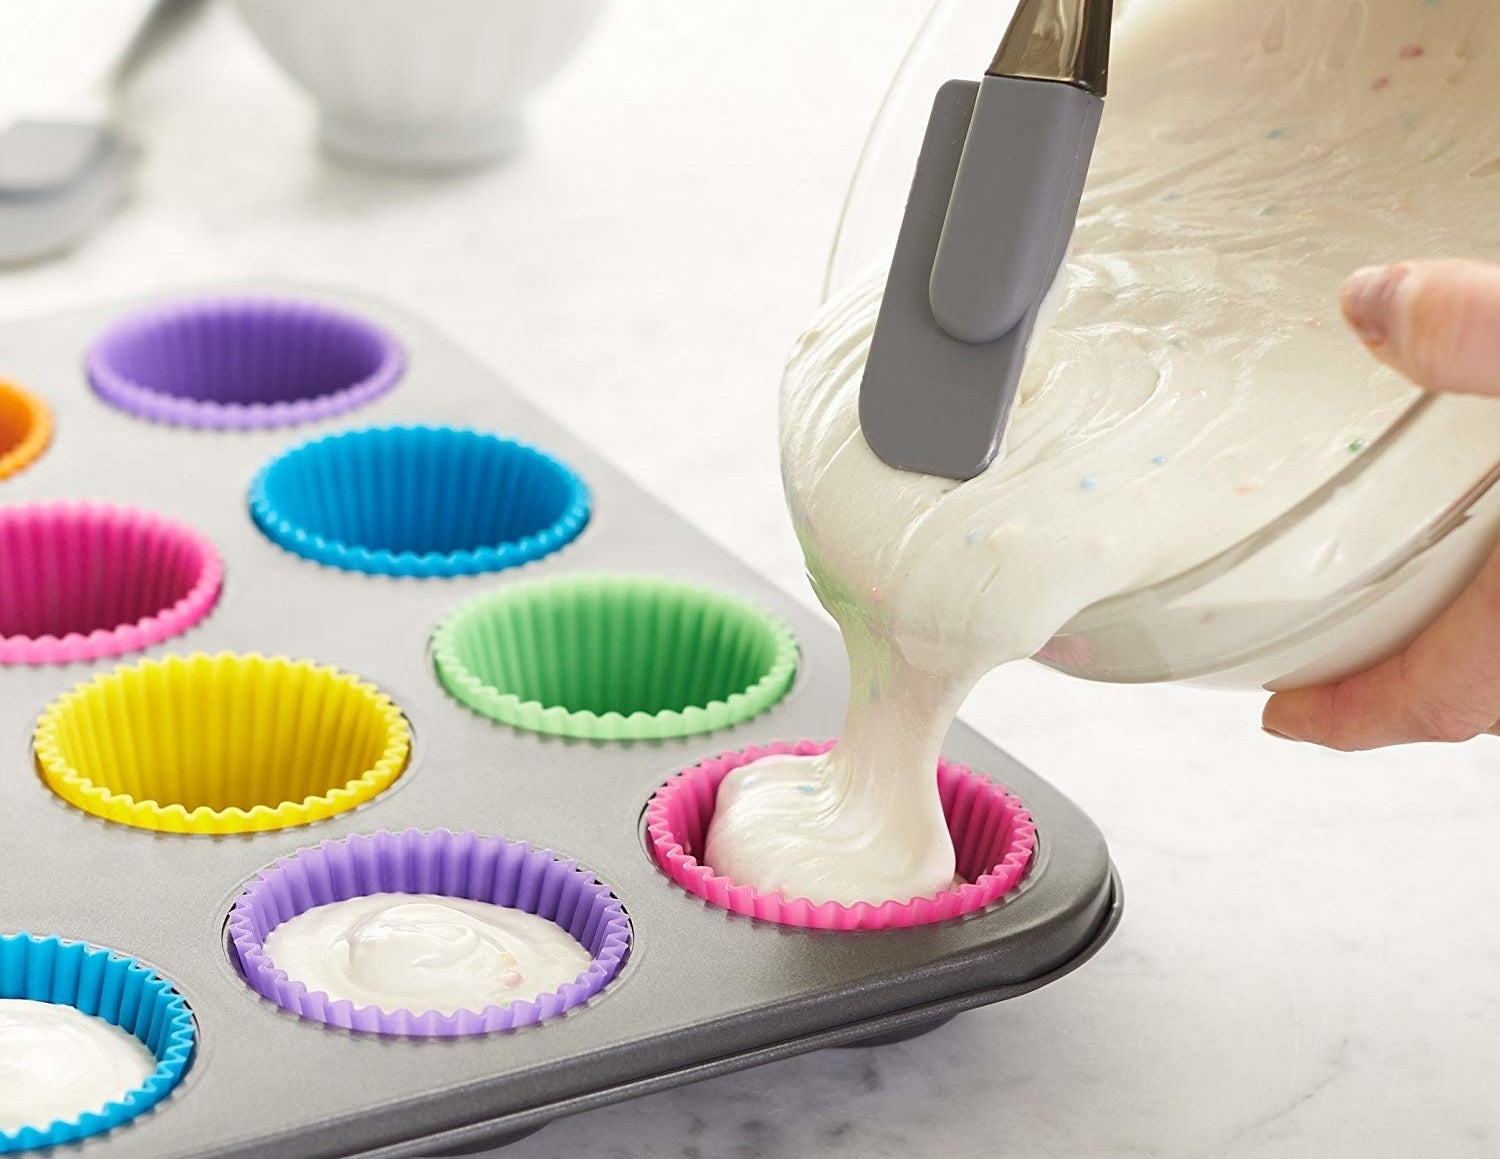 A person pouring batter into the colorful silicone baking cups